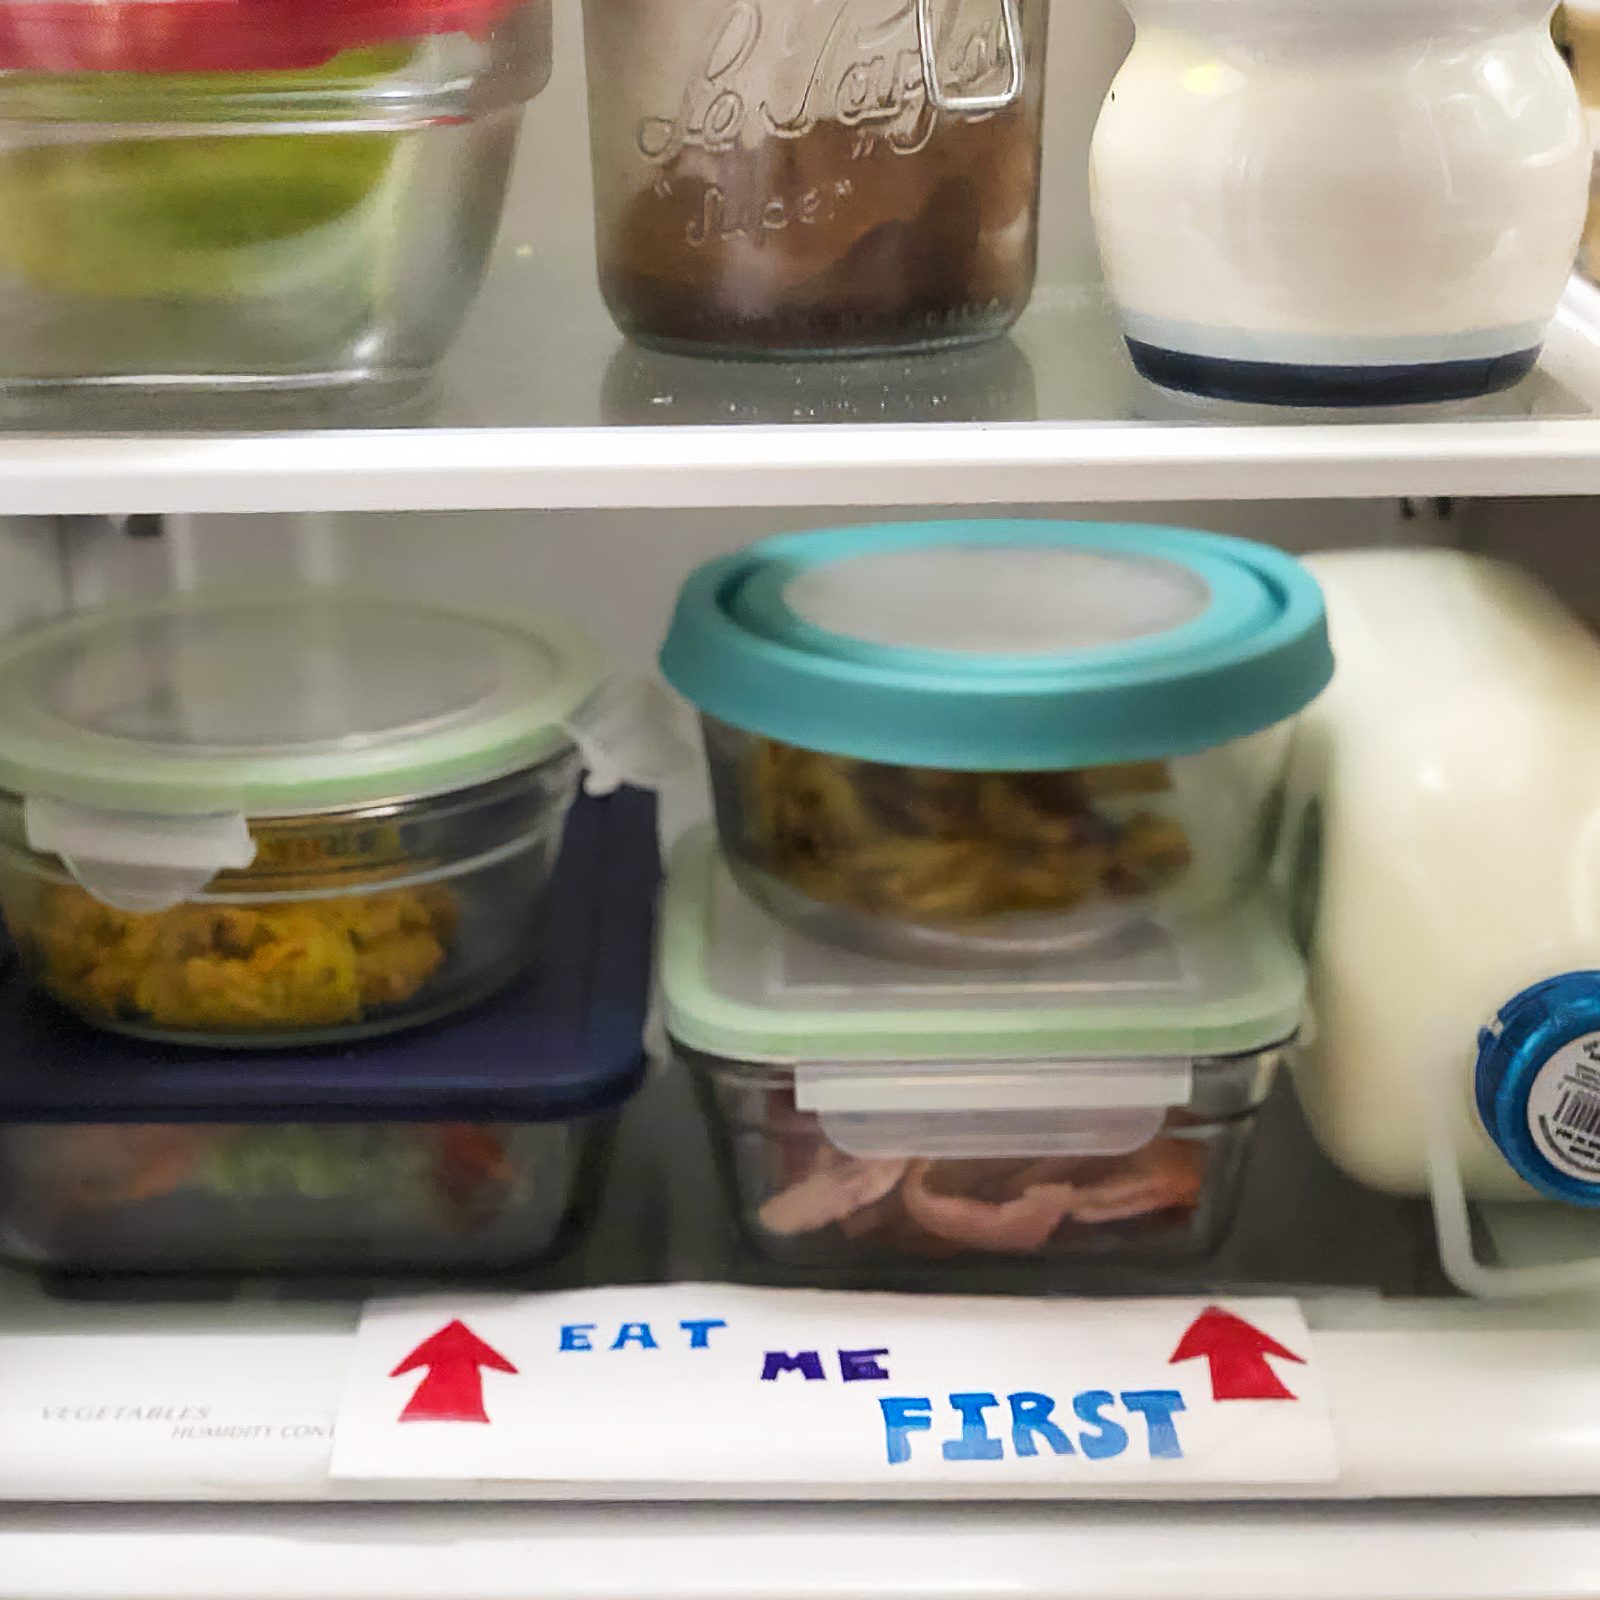 containers in fridge with "eat me first" label on bottom shelf